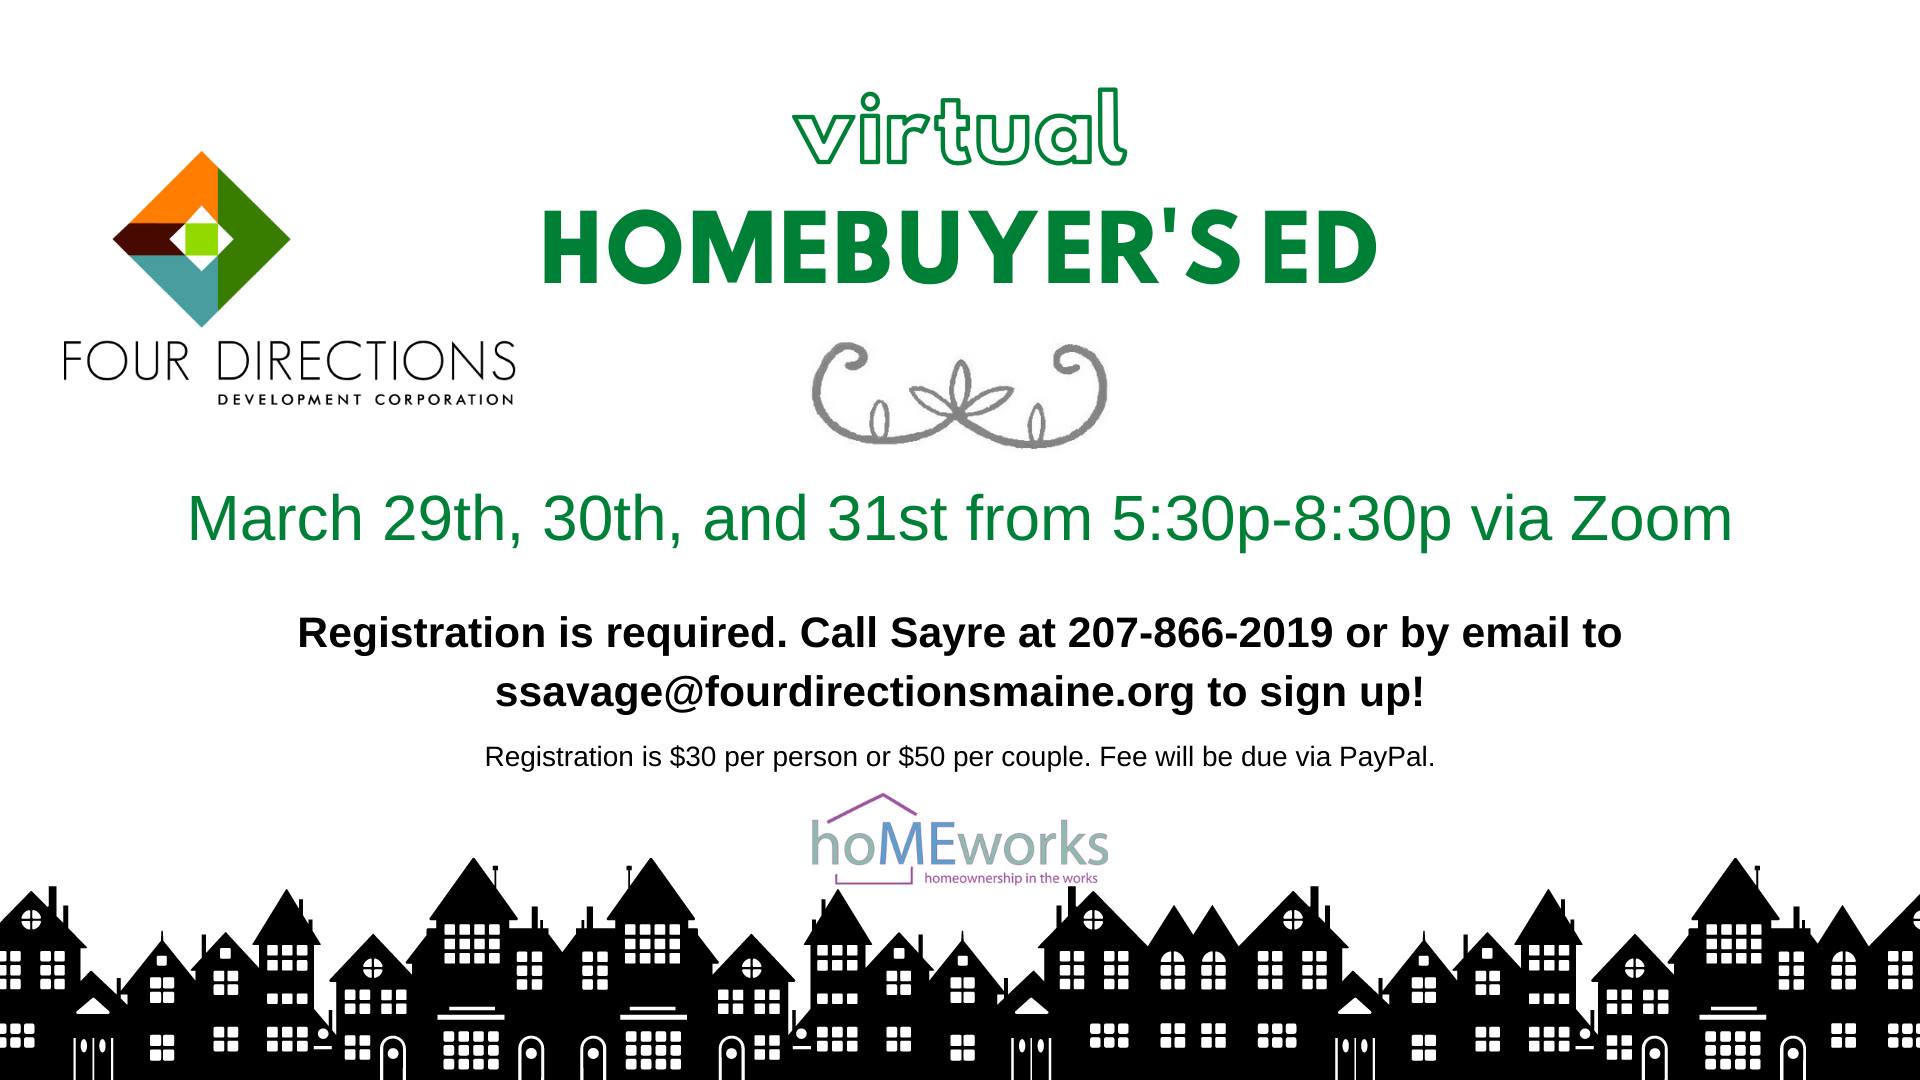 Virtual Homebuyer Education | Four Directions